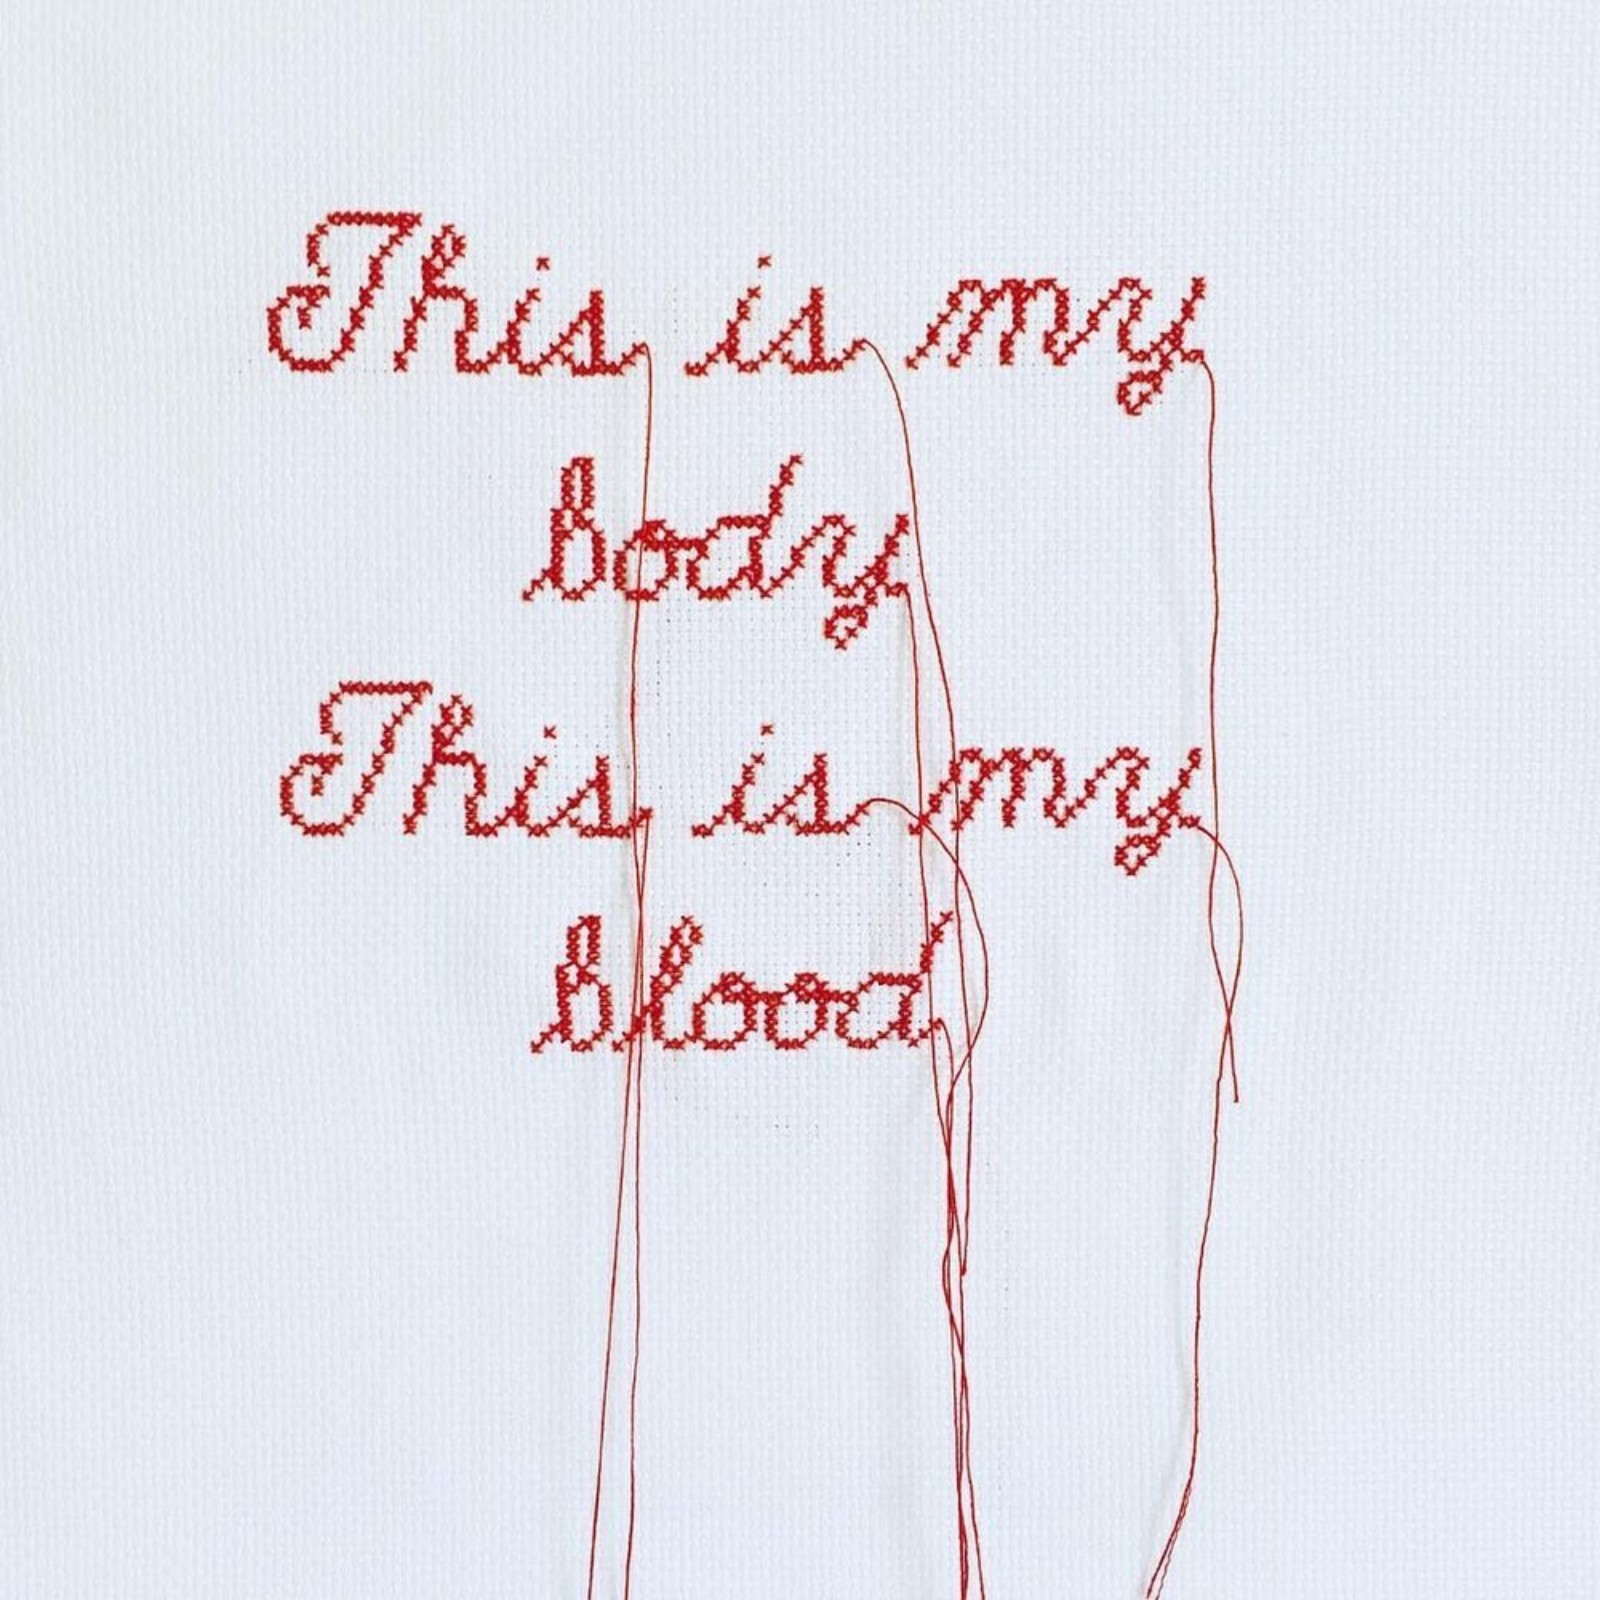 Red letters cross stitched on to white fabric. The letters read 'This is my body. This is my blood'. Red cotton hangs from the lettering.